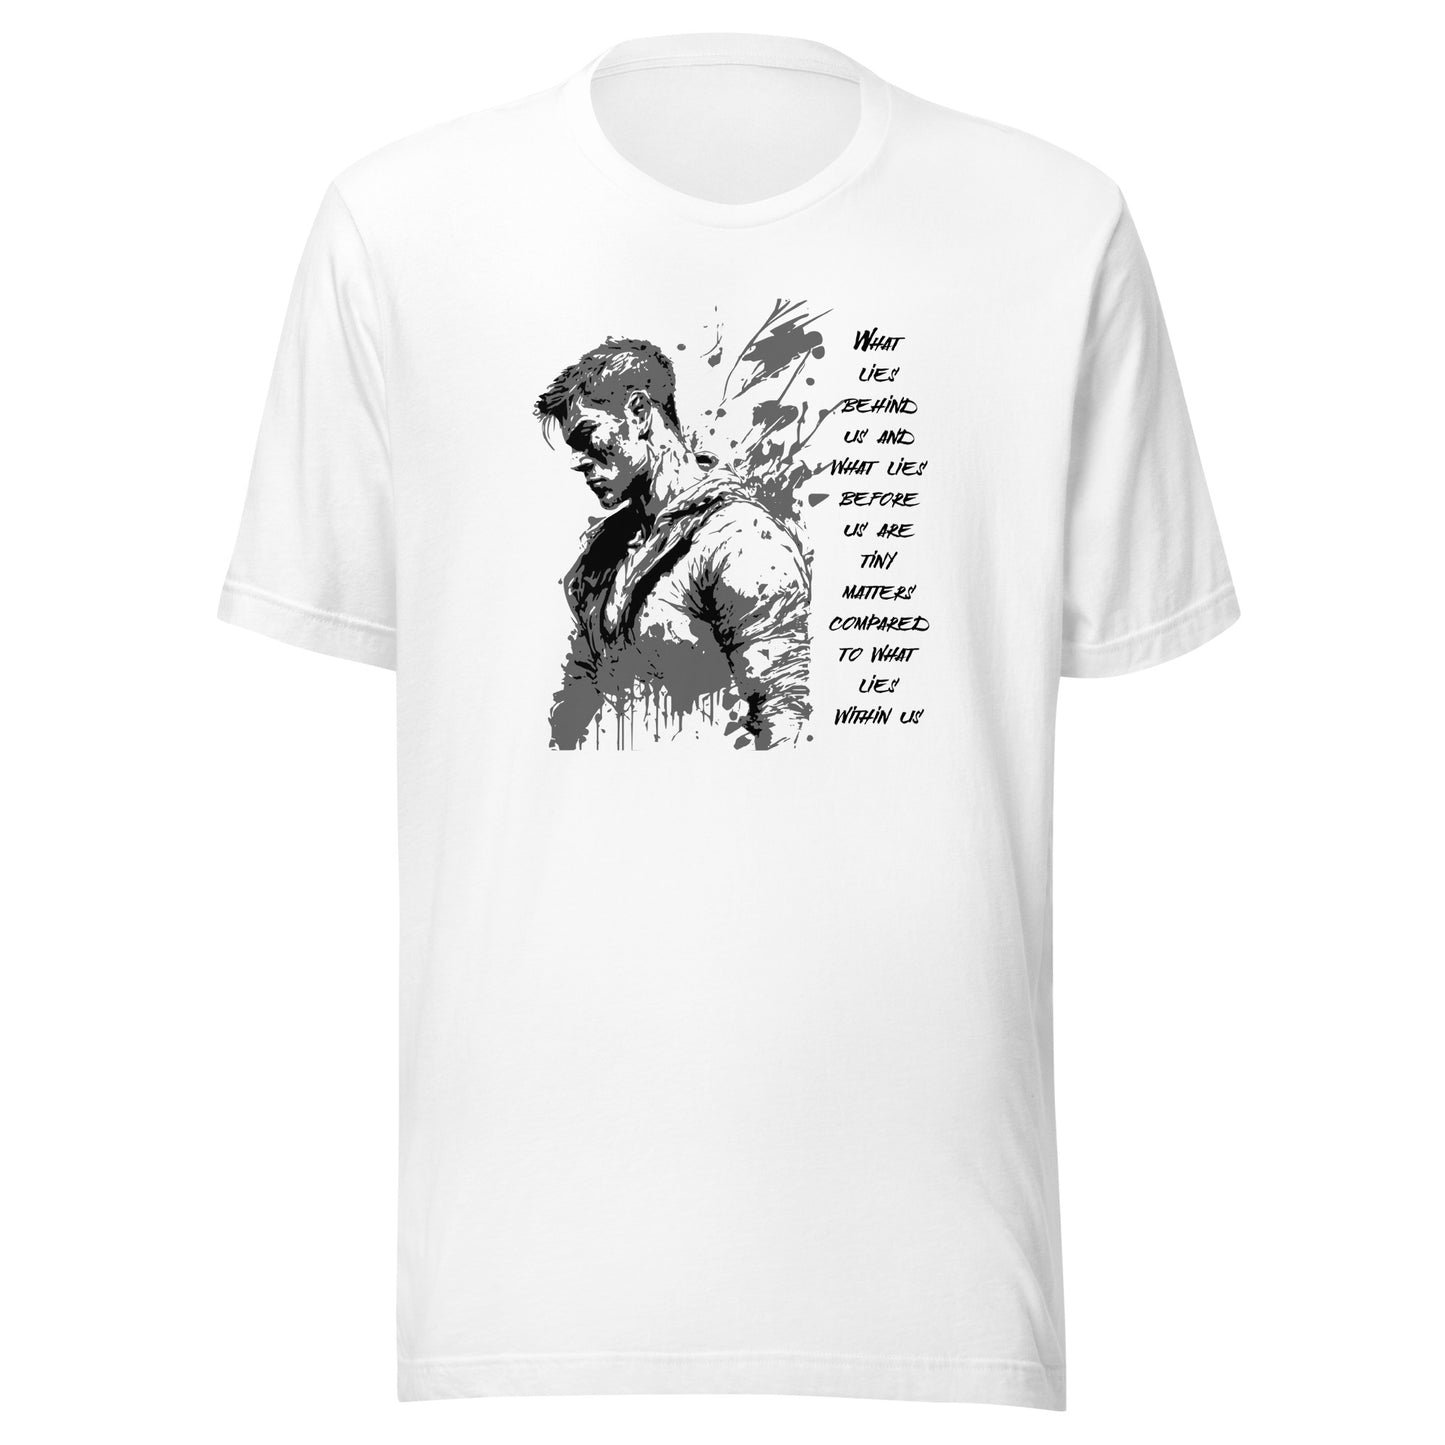 What Lies Within Us Men's Graphic T-Shirt White